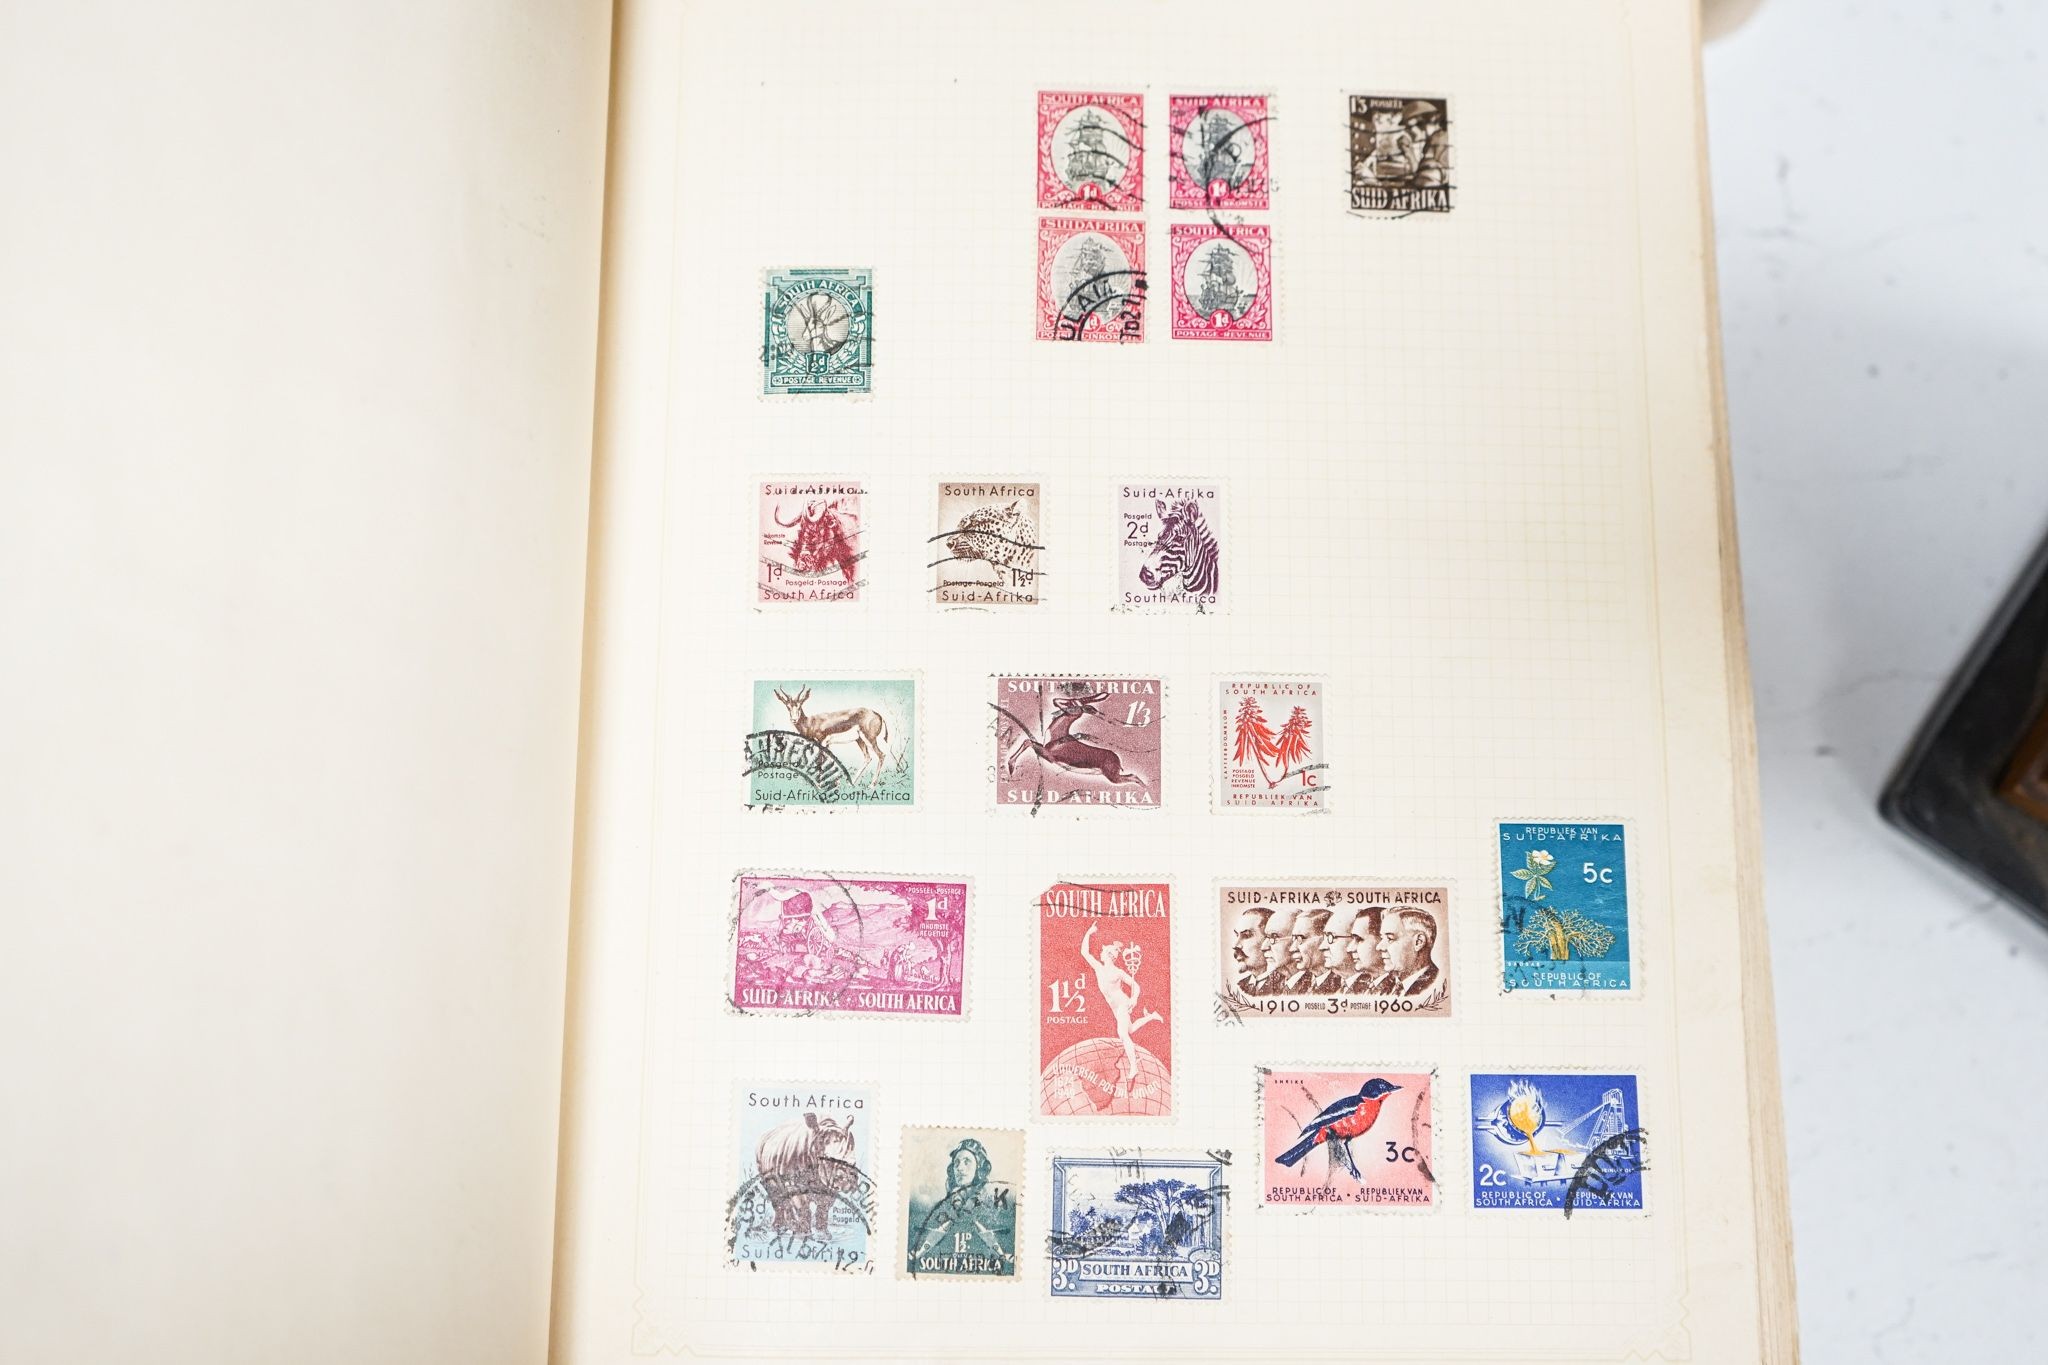 World stamps with Royal events, first day covers, Channel Islands, Australia and various